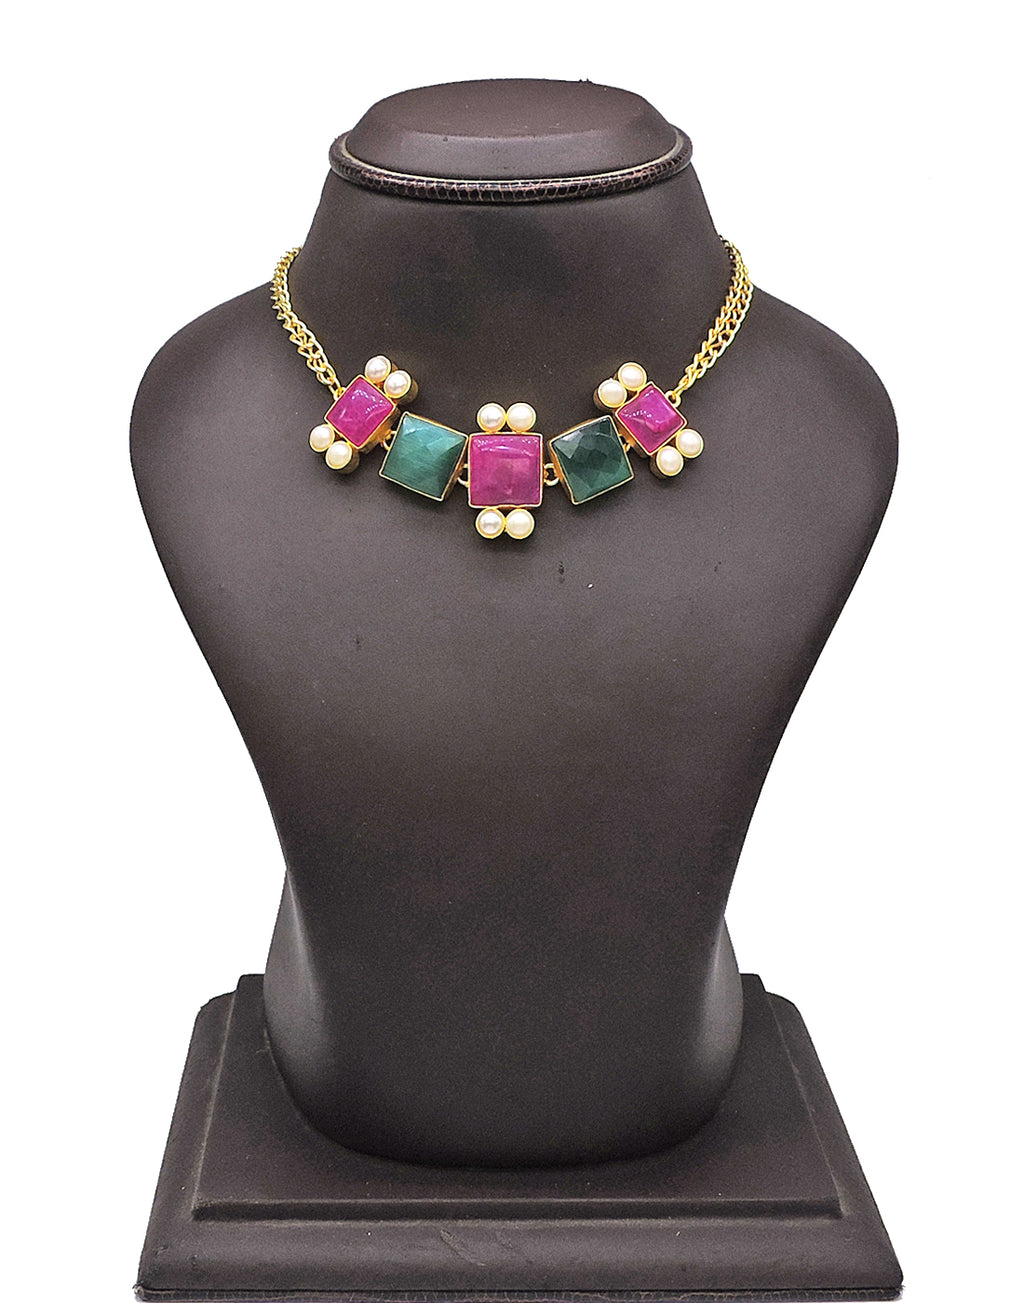 Rainbow Cube Necklace - Statement Necklaces - Gold-Plated & Hypoallergenic Jewellery - Made in India - Dubai Jewellery - Dori